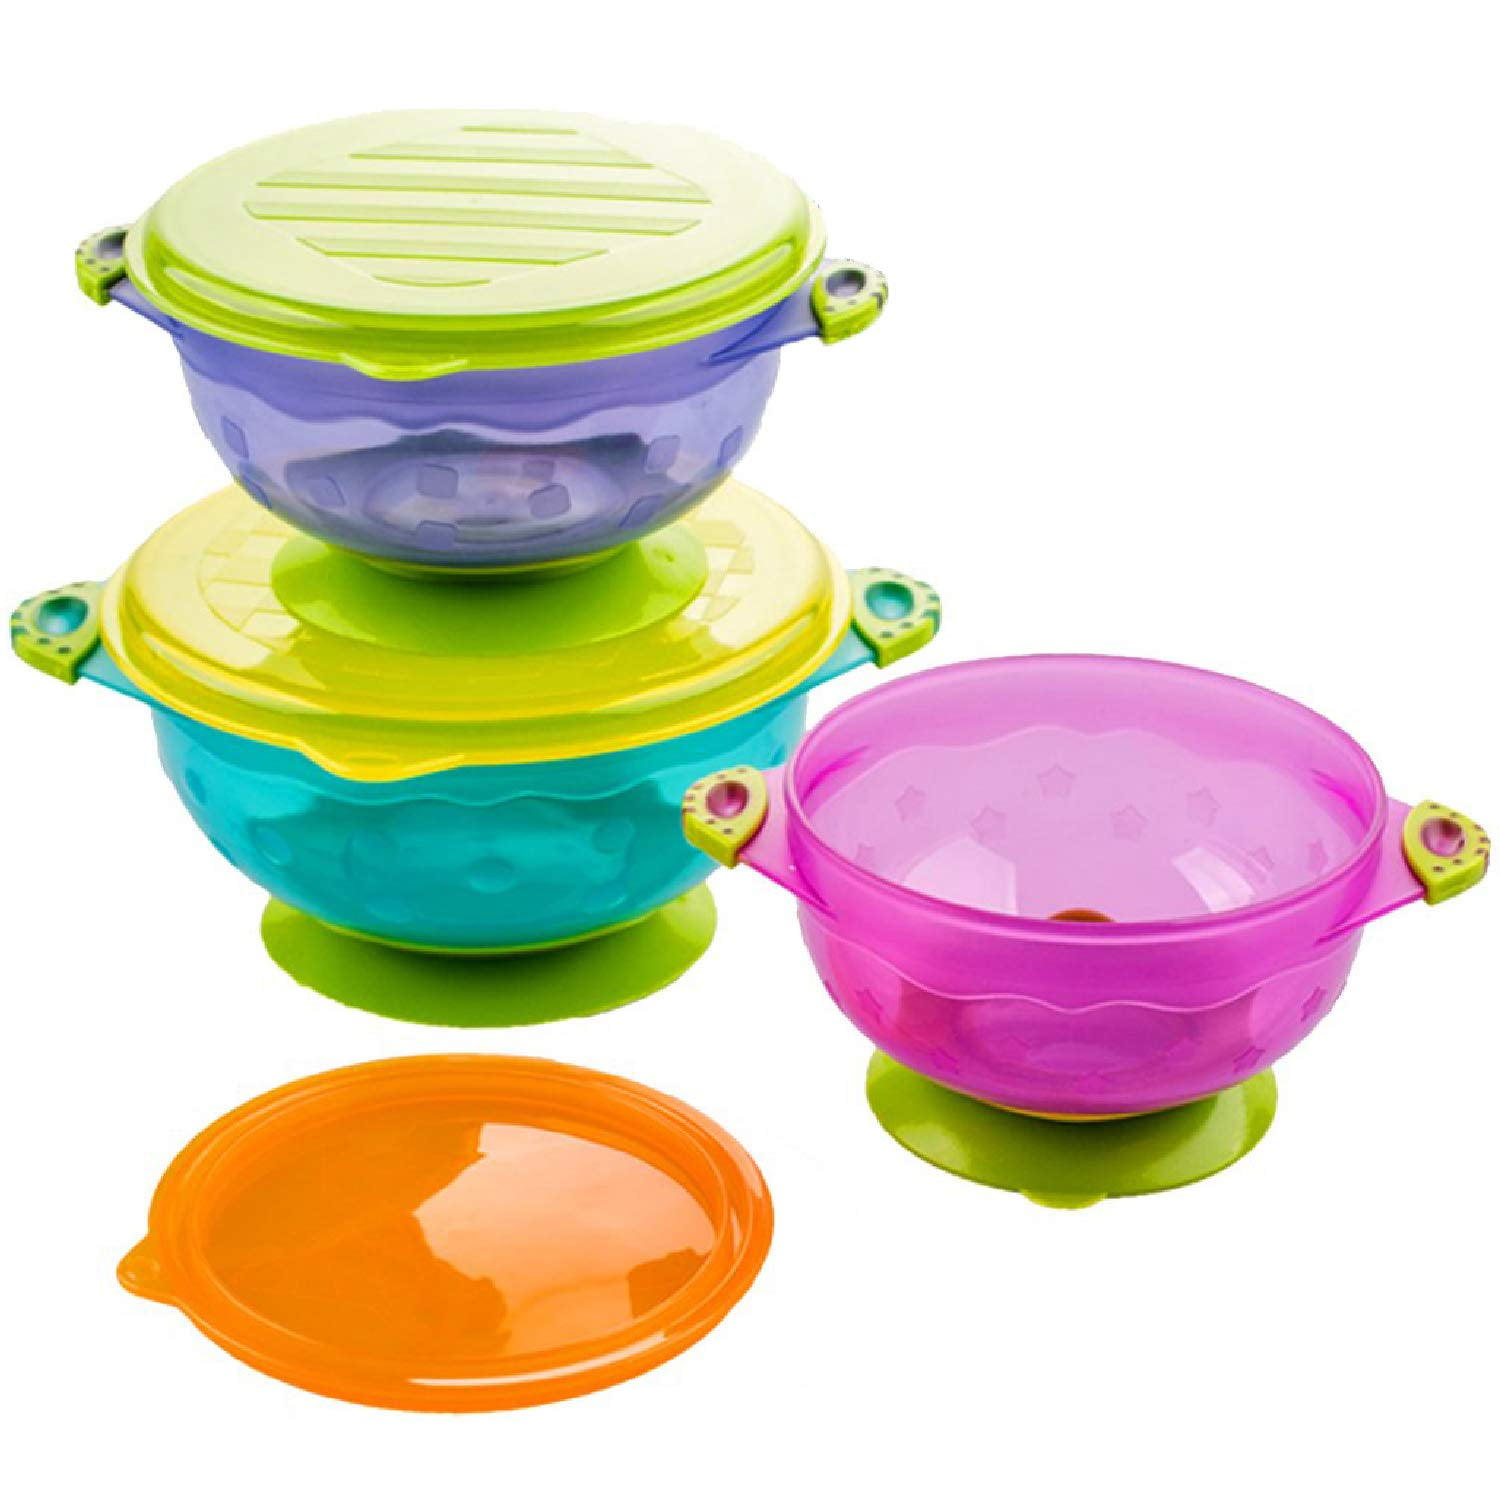 Baby Bowl Infant & Toddler Weaning Dish for Self-feeding Kids Tableware Stay Put 